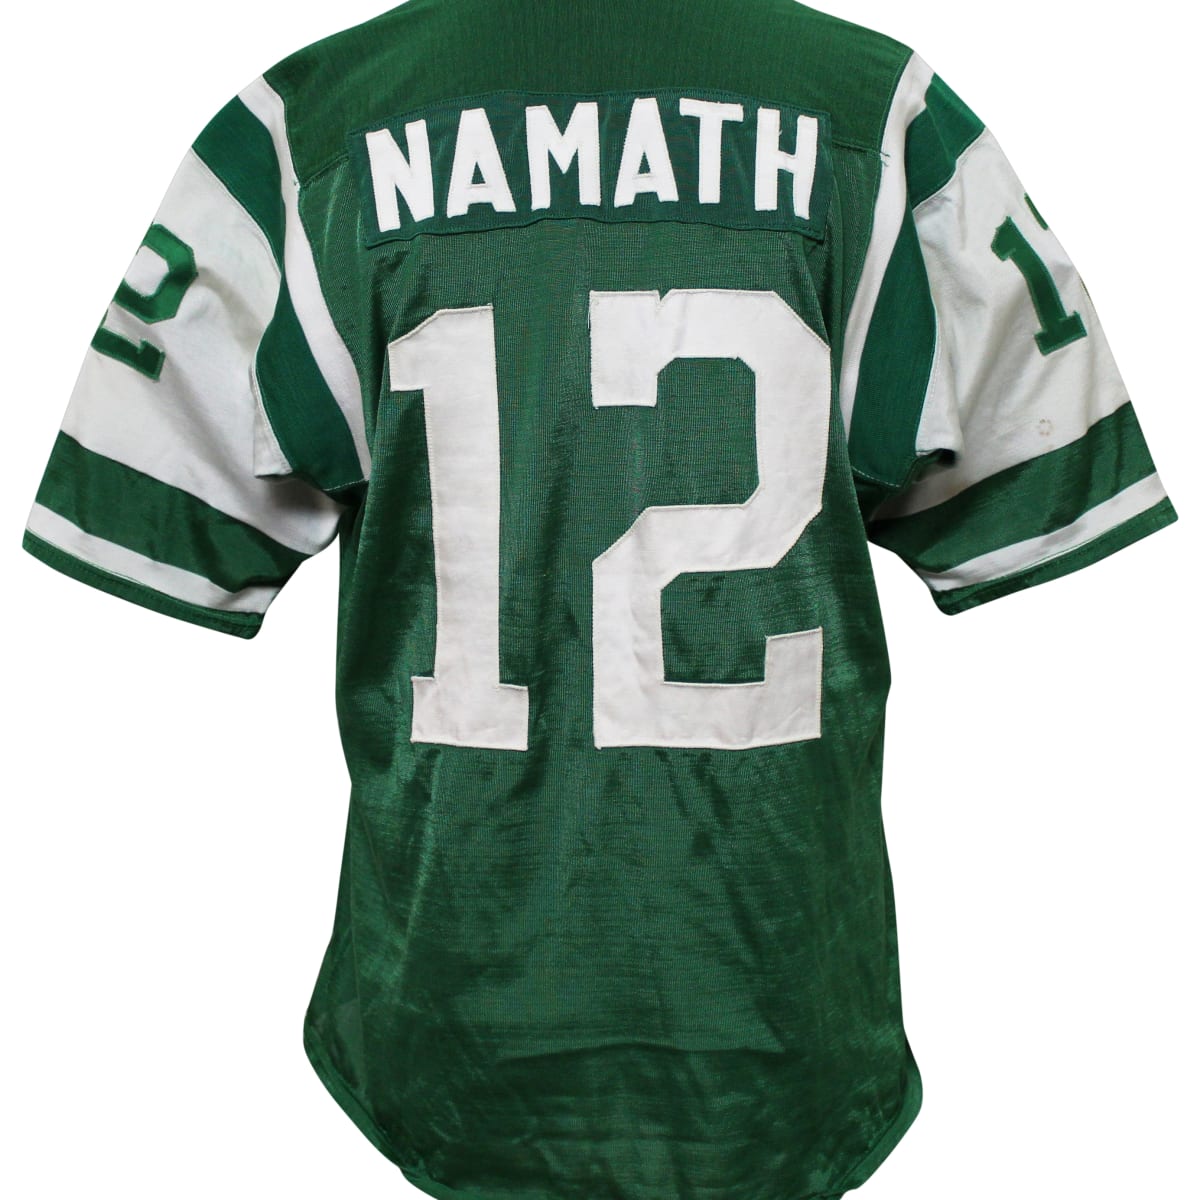 Joe Namath rookie Jets jersey to be auctioned - Sports Collectors Digest